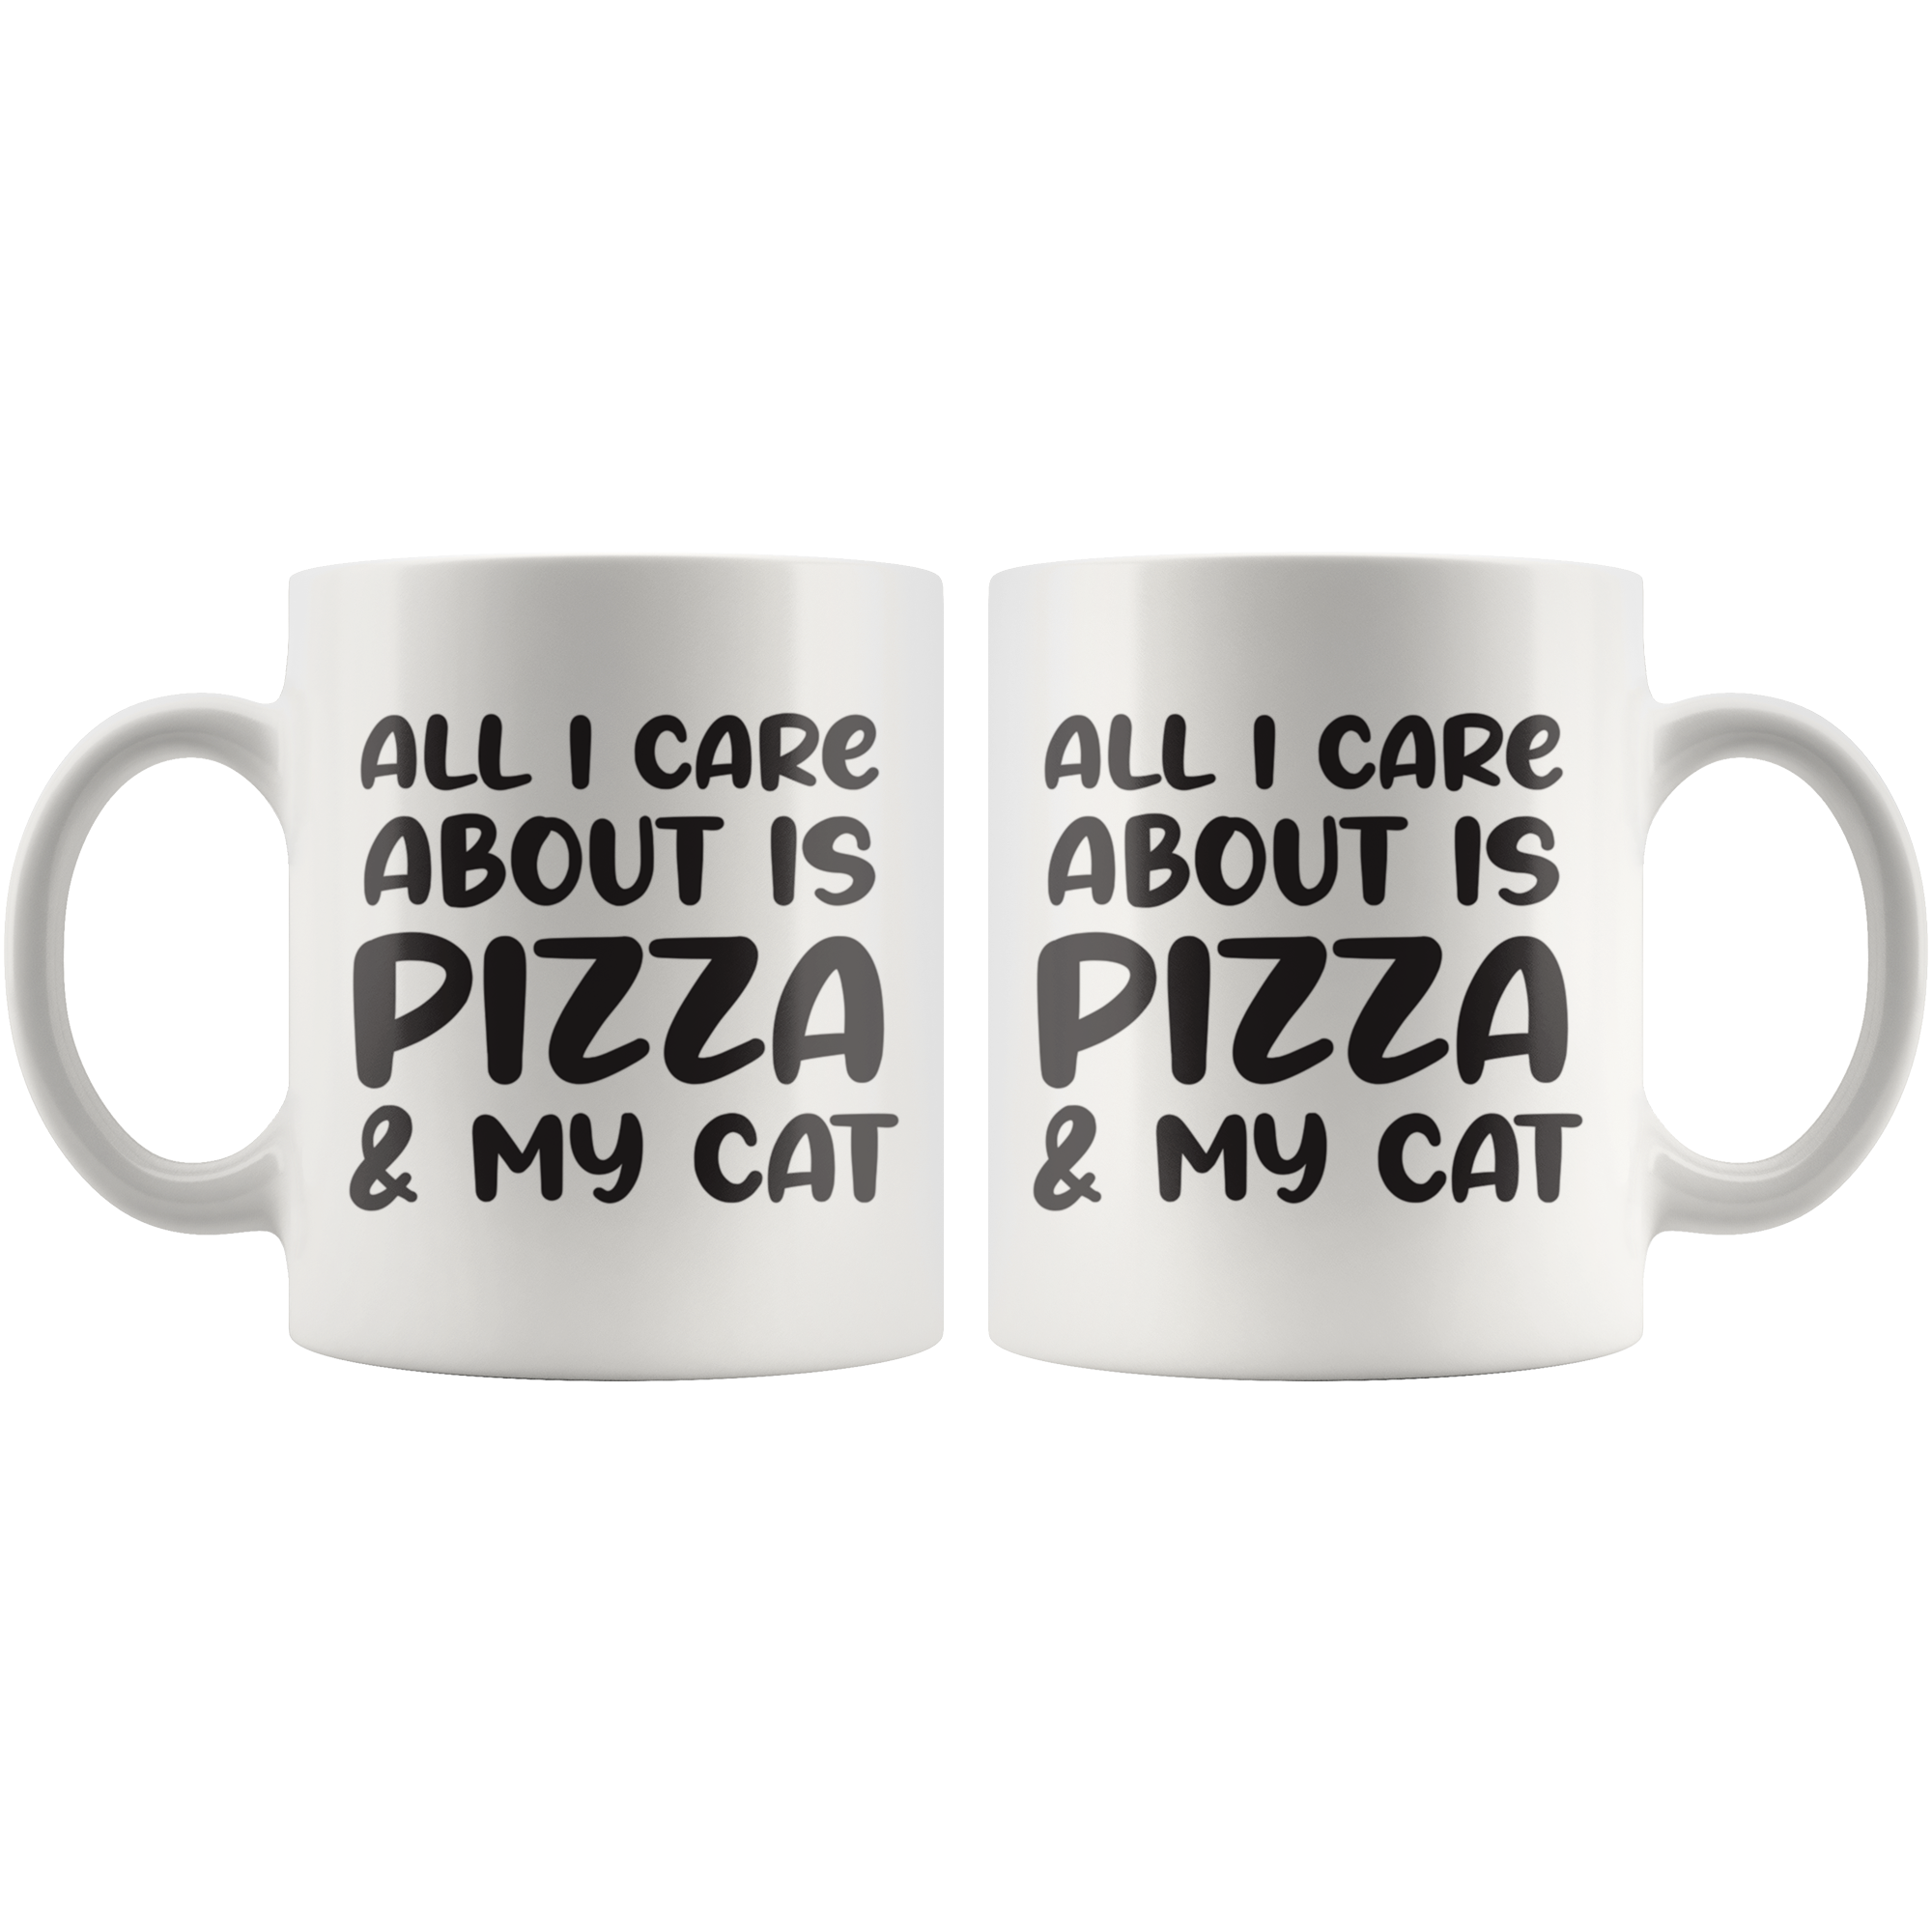 All I care About Is Pizza Coffee Mug